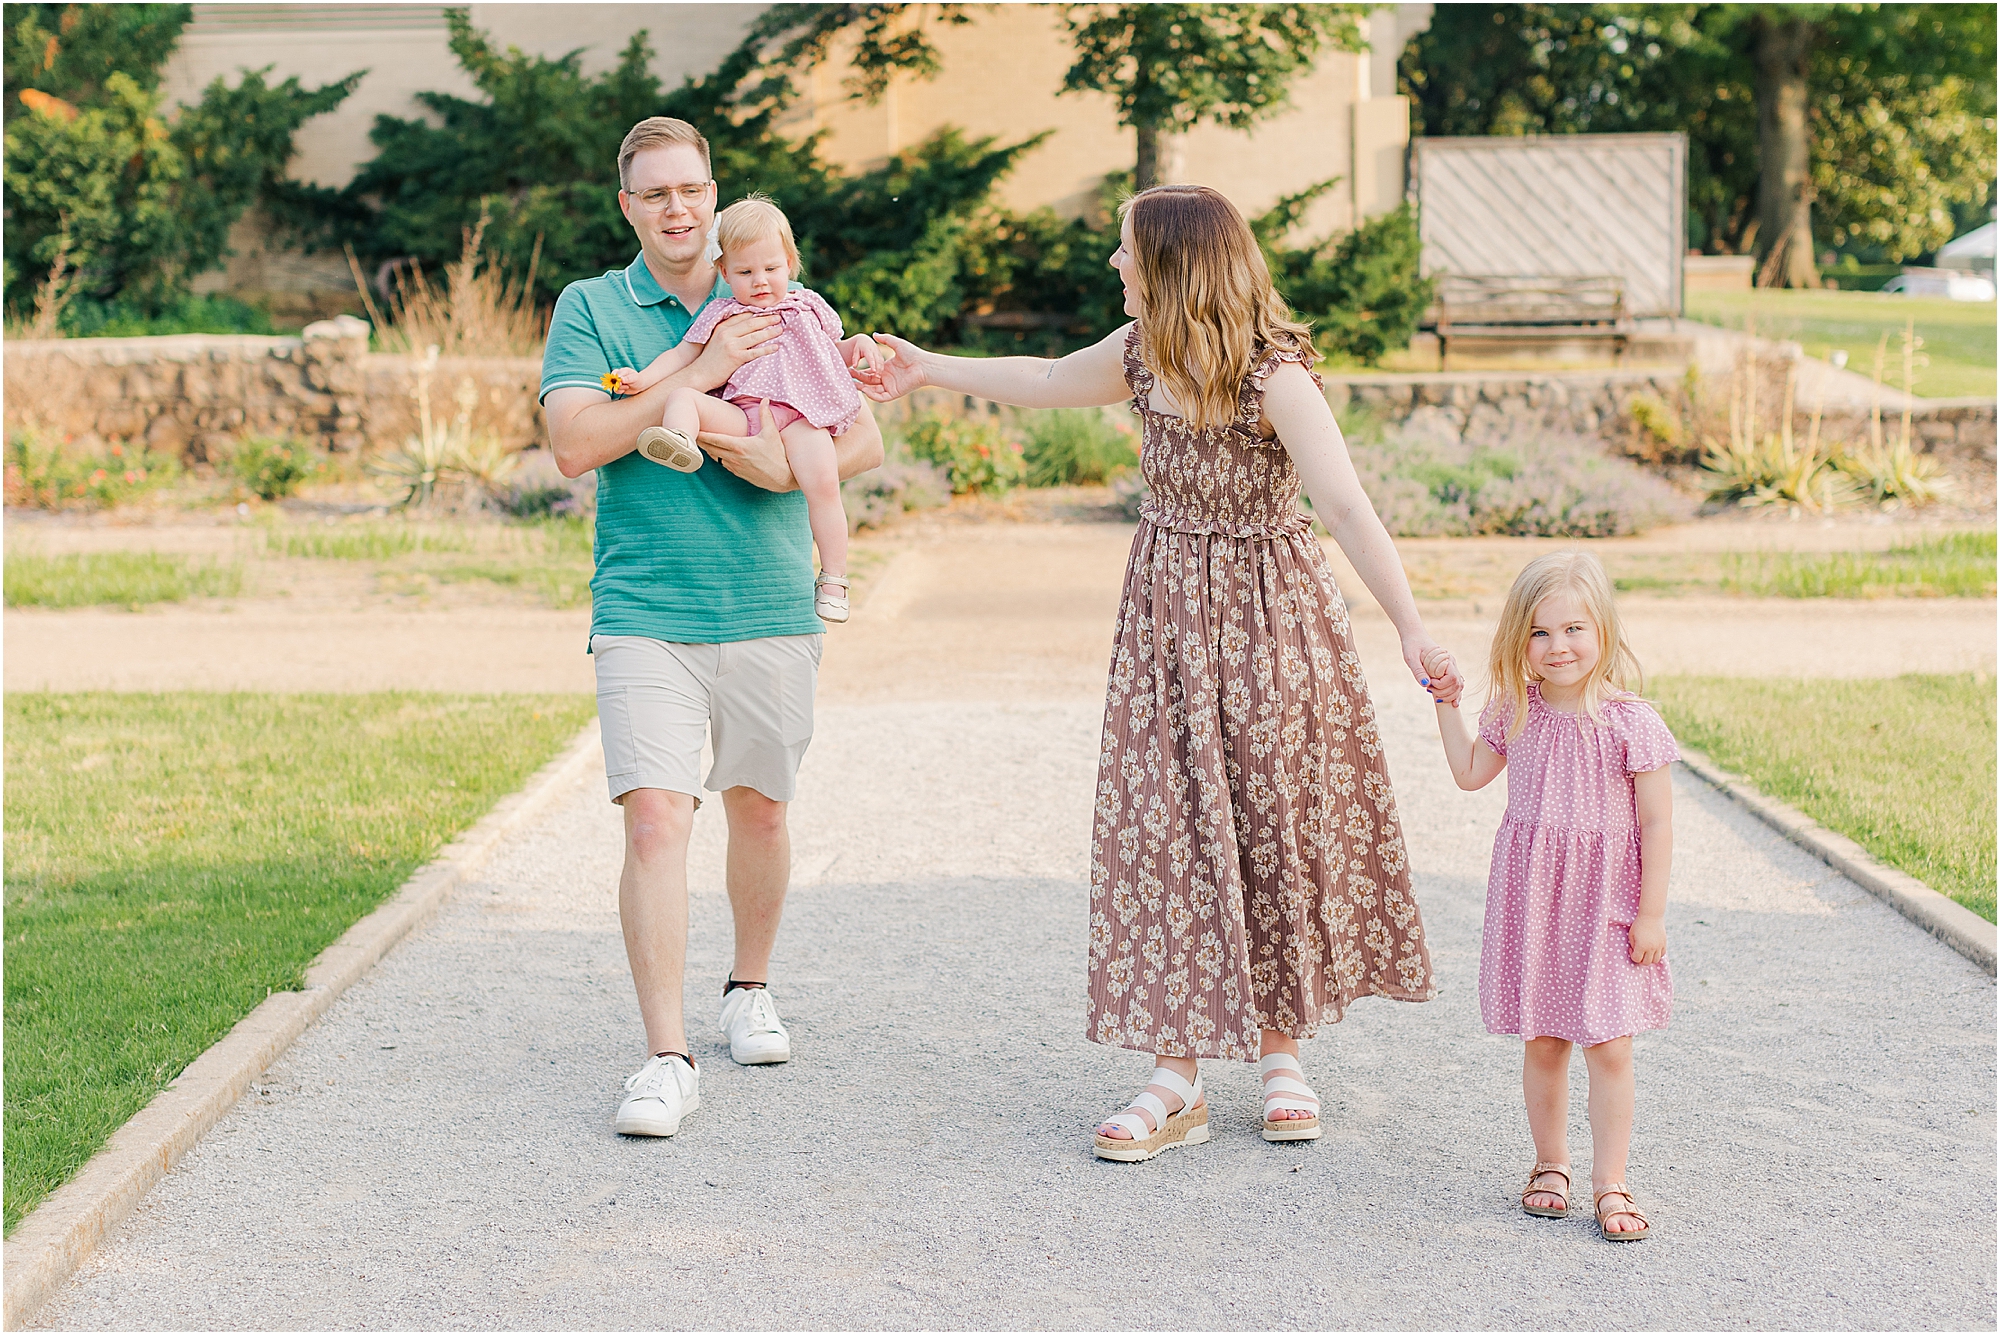 The family walking through the rose garden at woodward park at their summer family photo session.